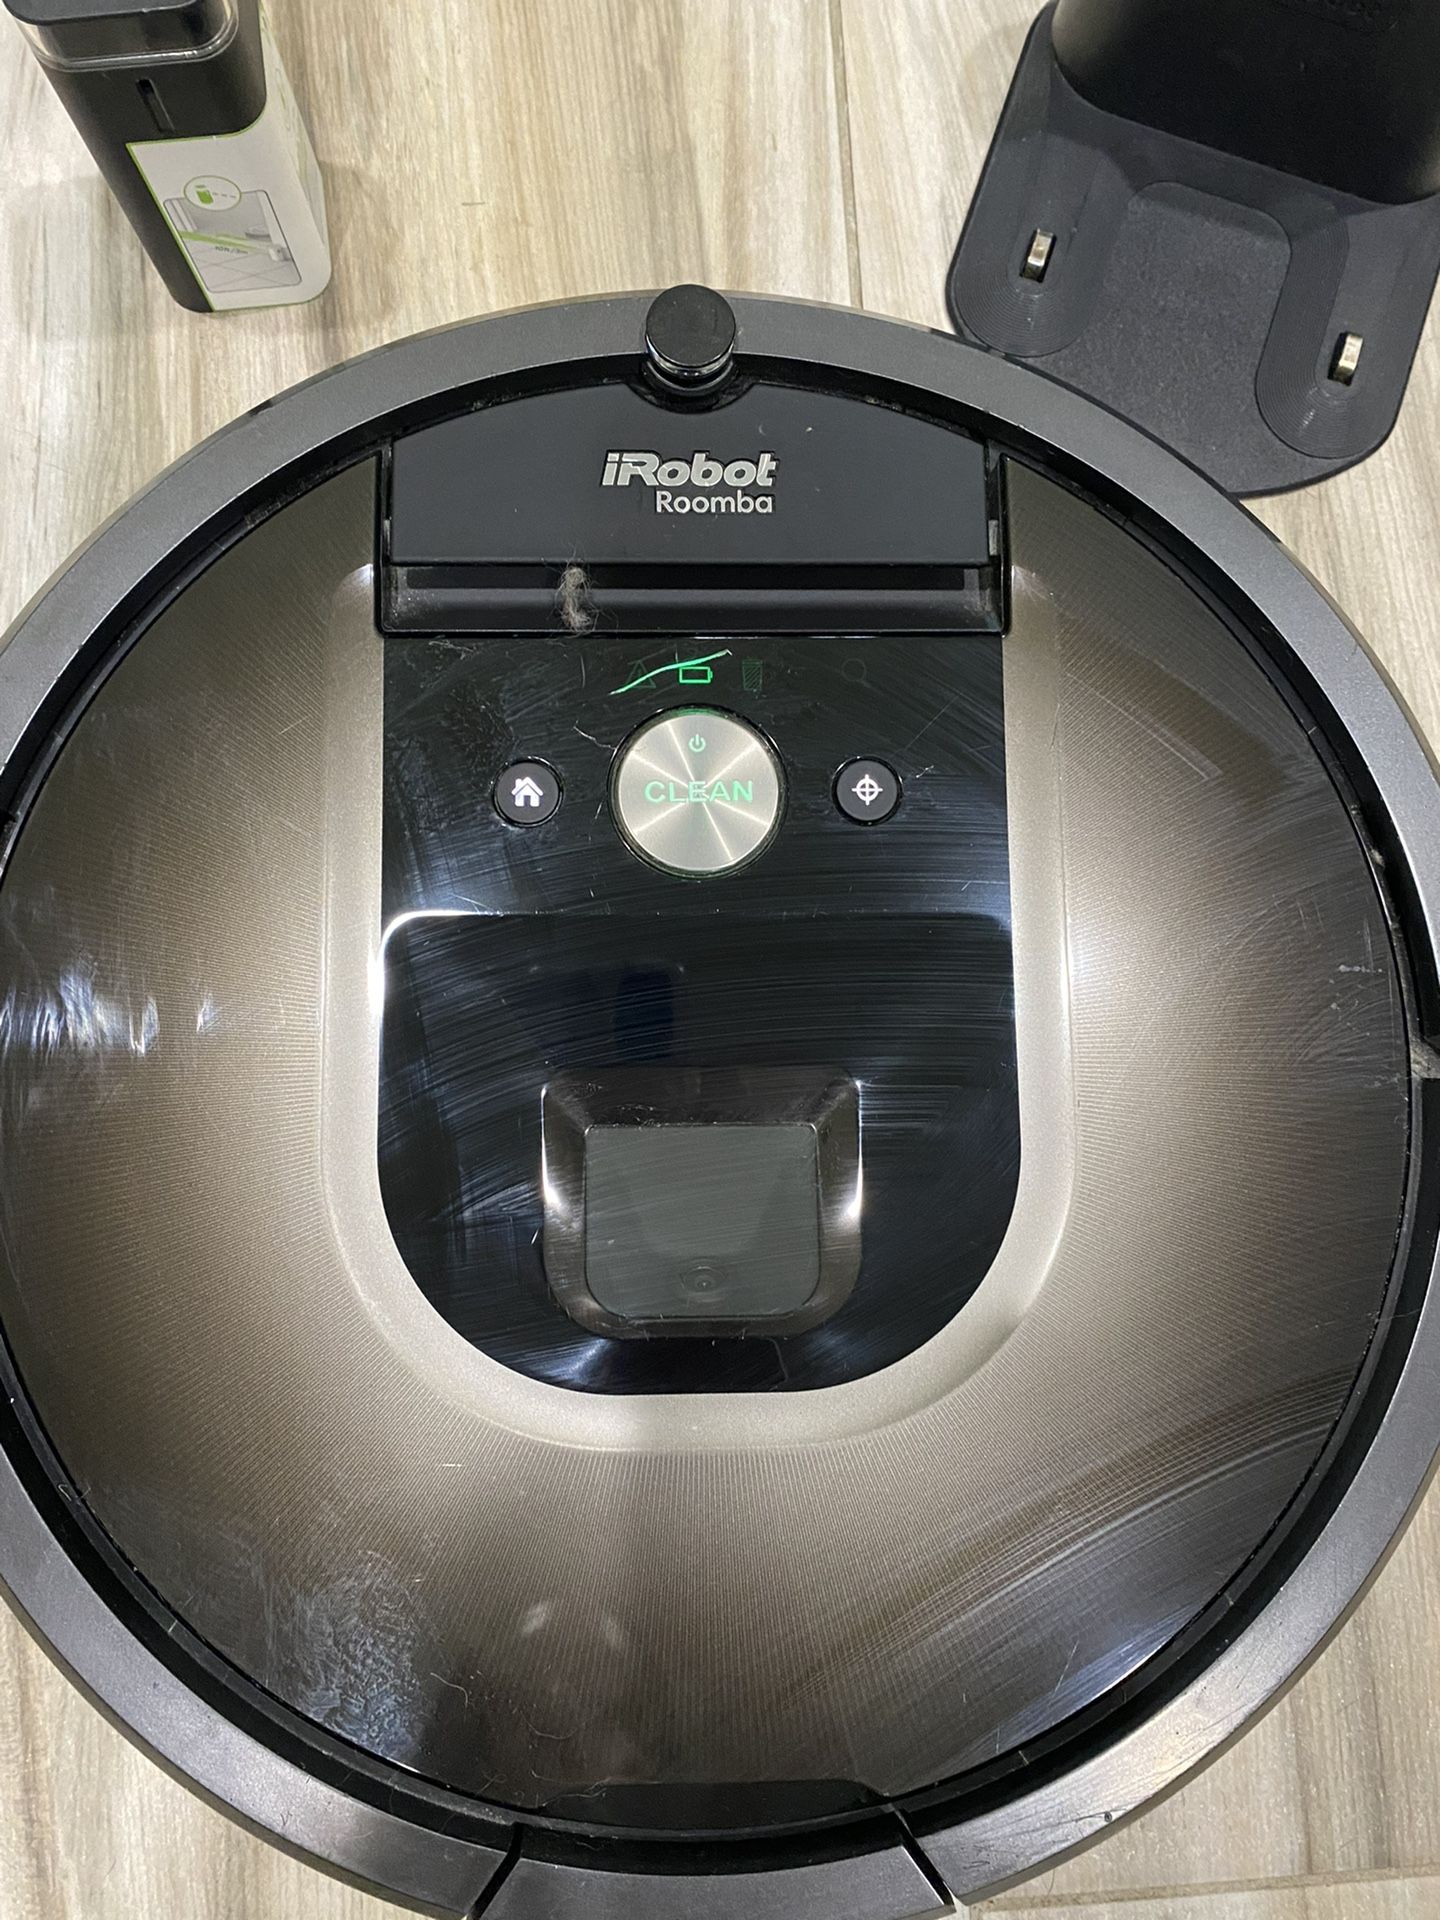 iRobot Roomba 980 Robot Vacuum-Wi-Fi Connected Mapping, Works with Alexa, Ideal for Pet Hair, Carpets, Hard Floors, Power Boost Technology, Black 